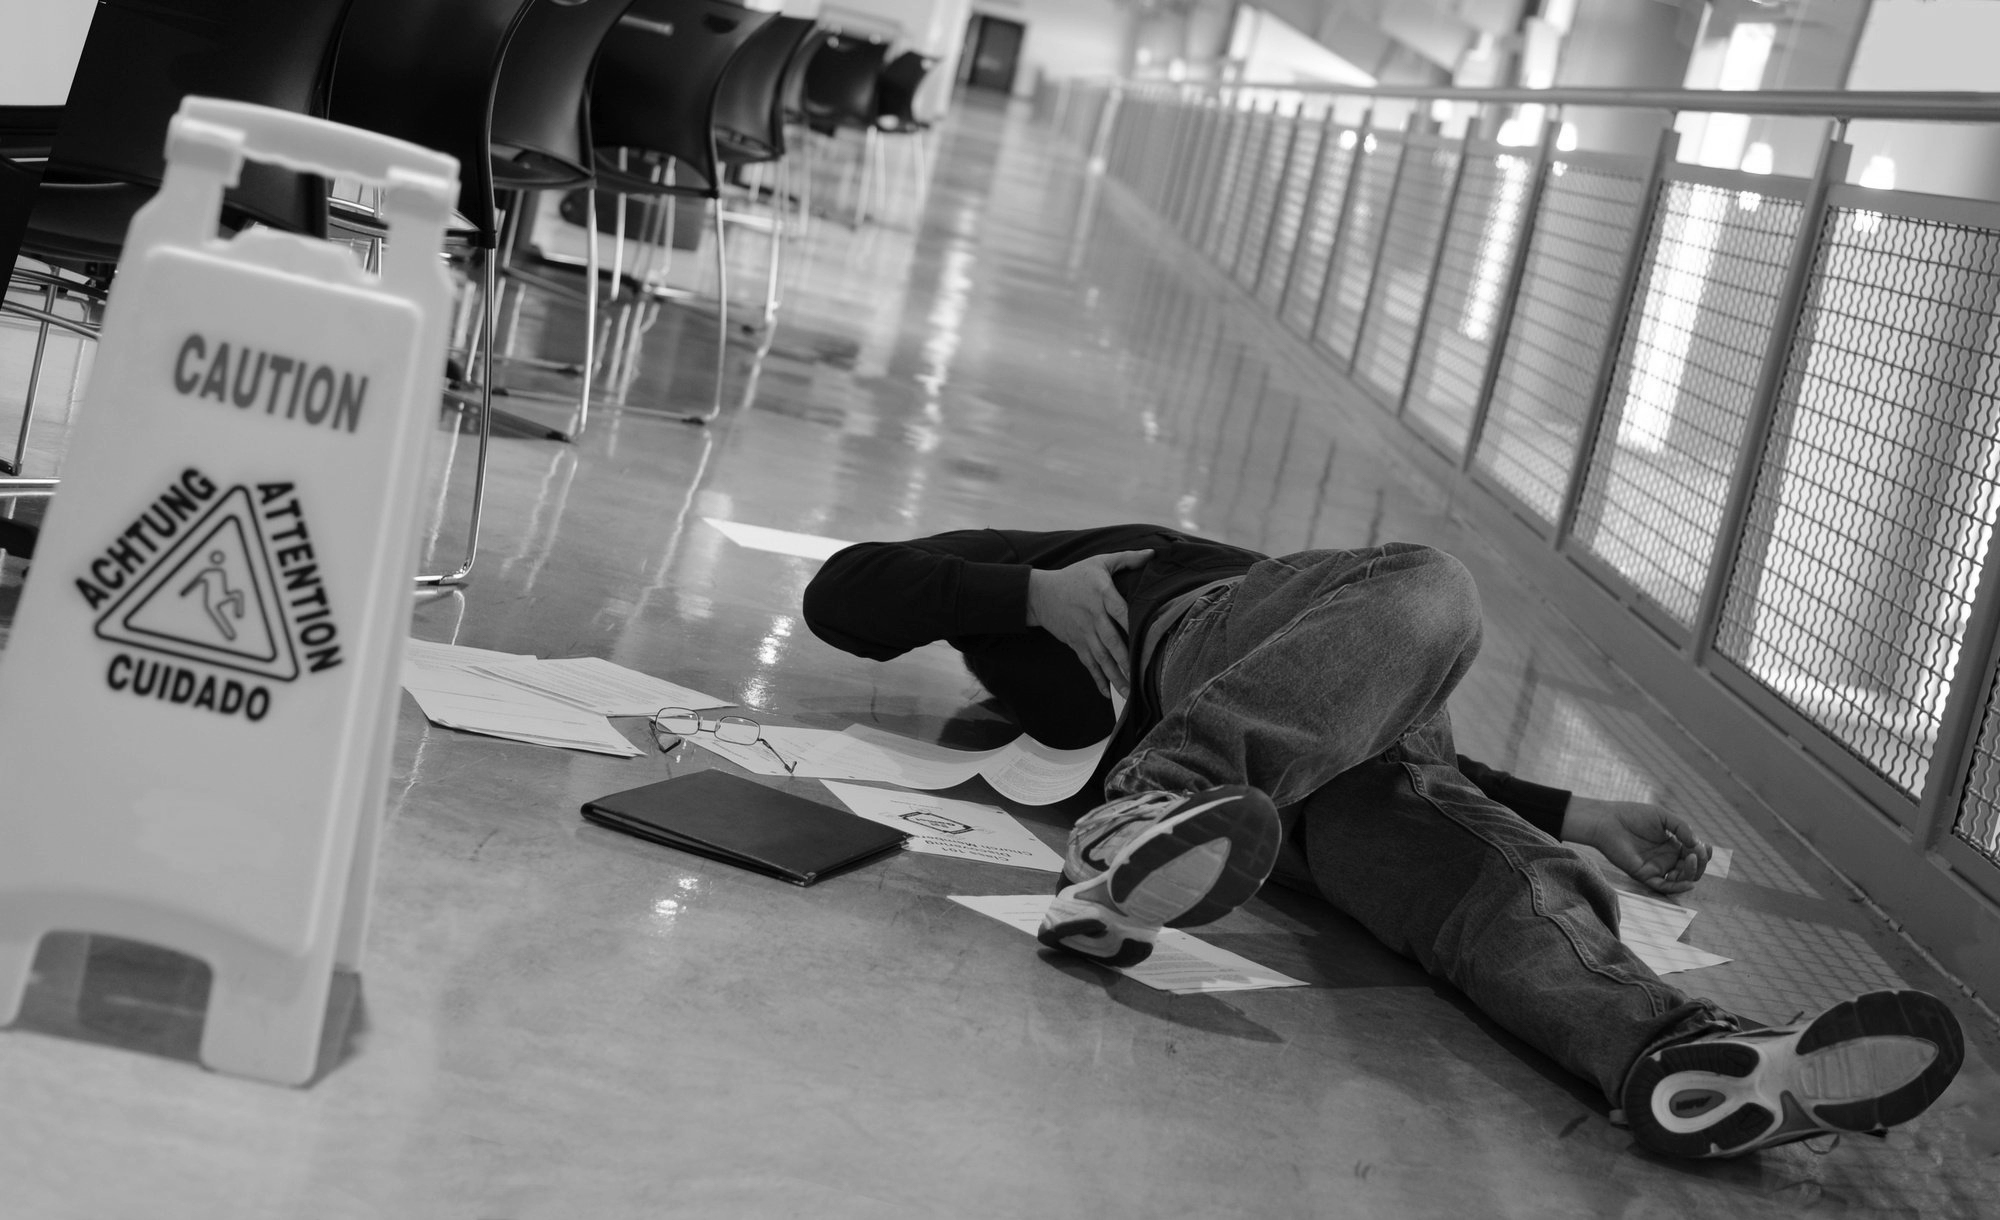 Picture of man laying on floor after falling with papers scattered around him